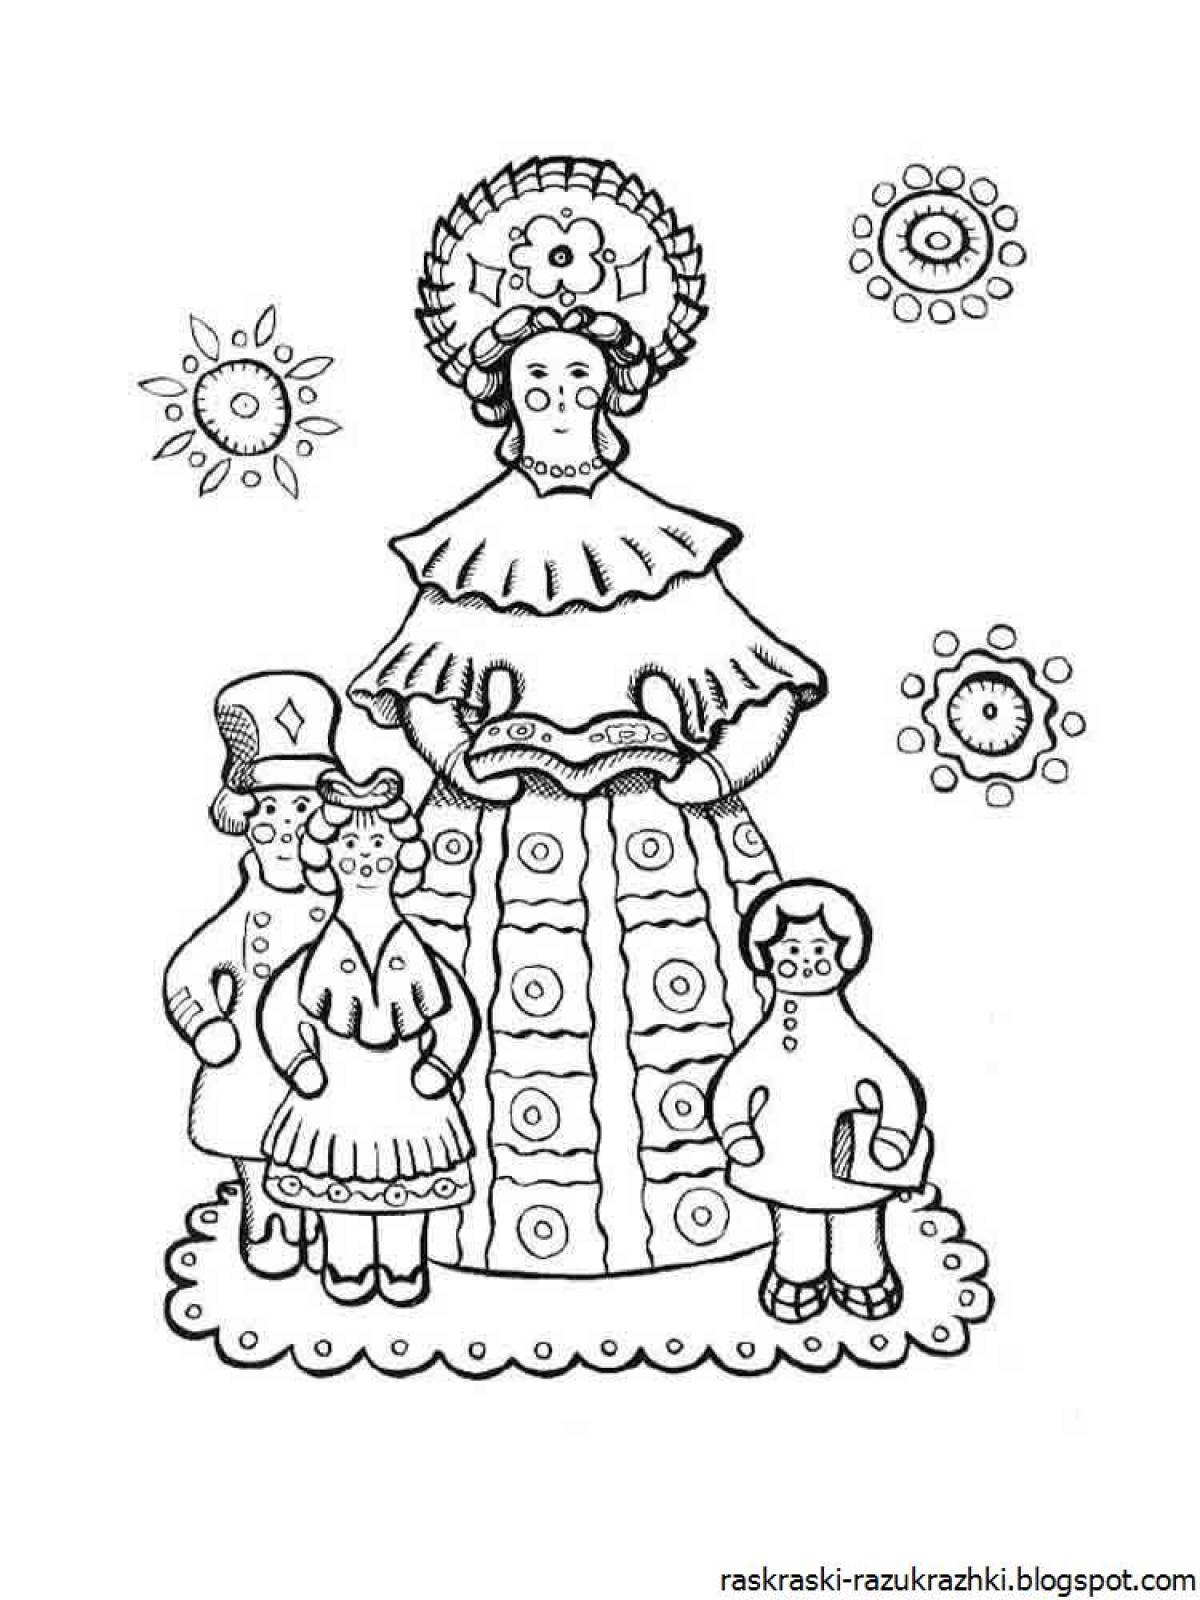 Coloring page fascinating Dymkovo toy